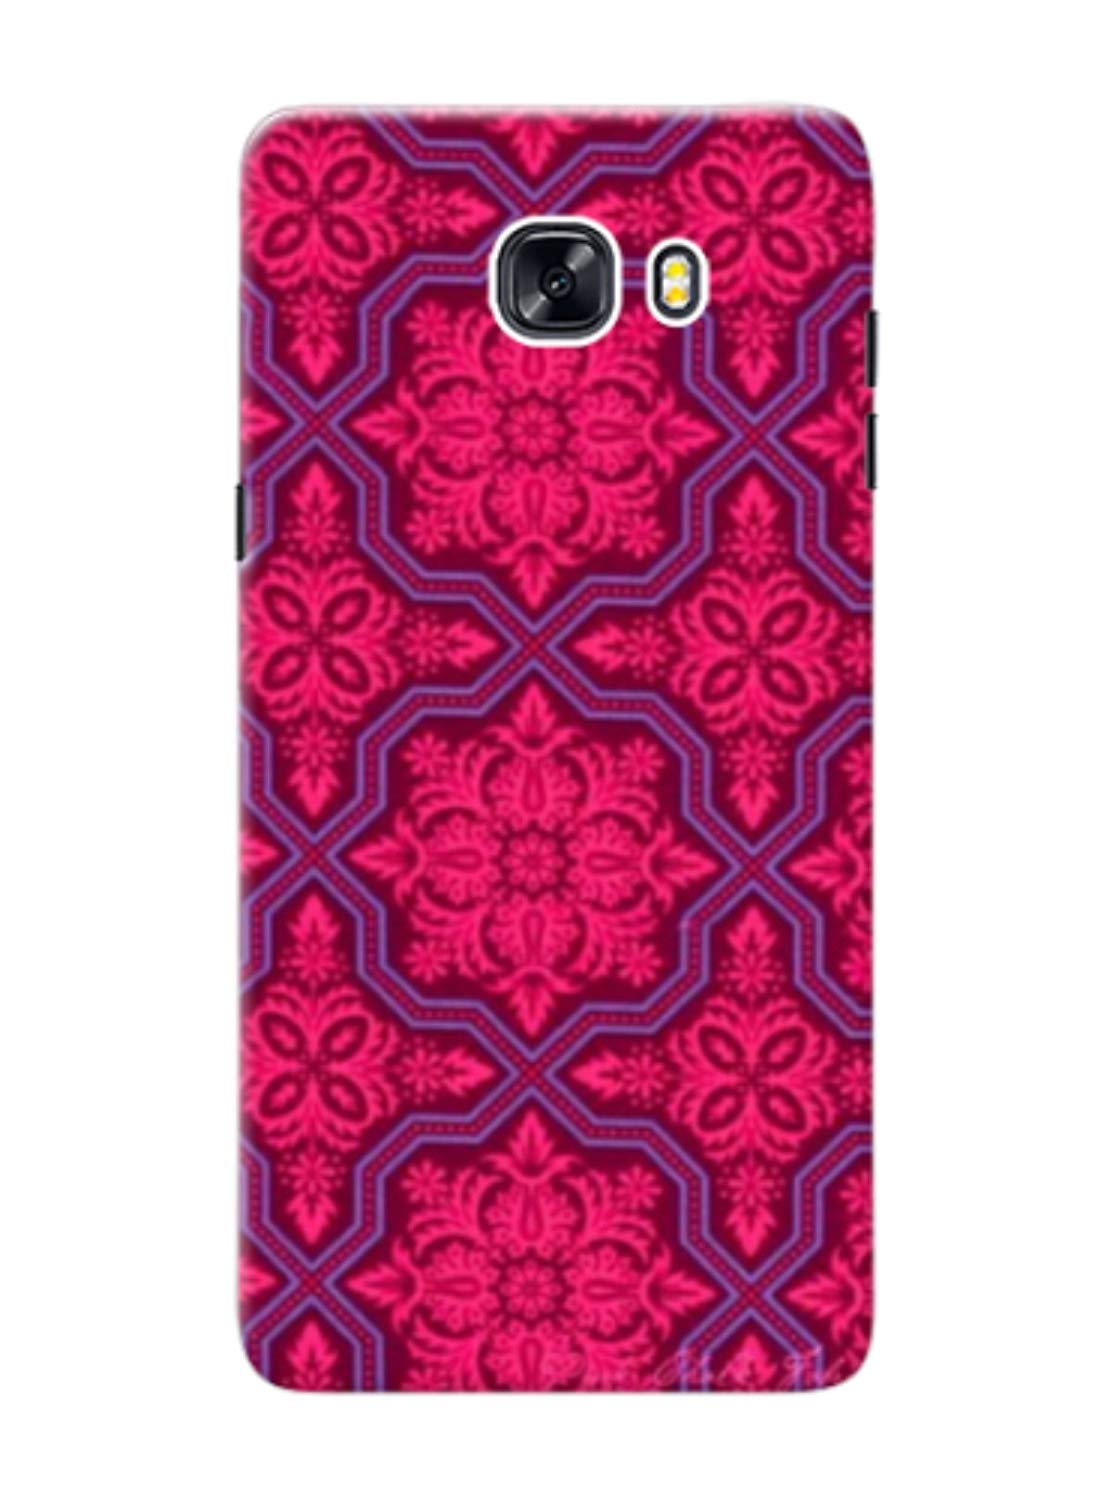 Samsung Galaxy C9 Pro Cover With Pink Wallpaper Print - Textile - HD Wallpaper 